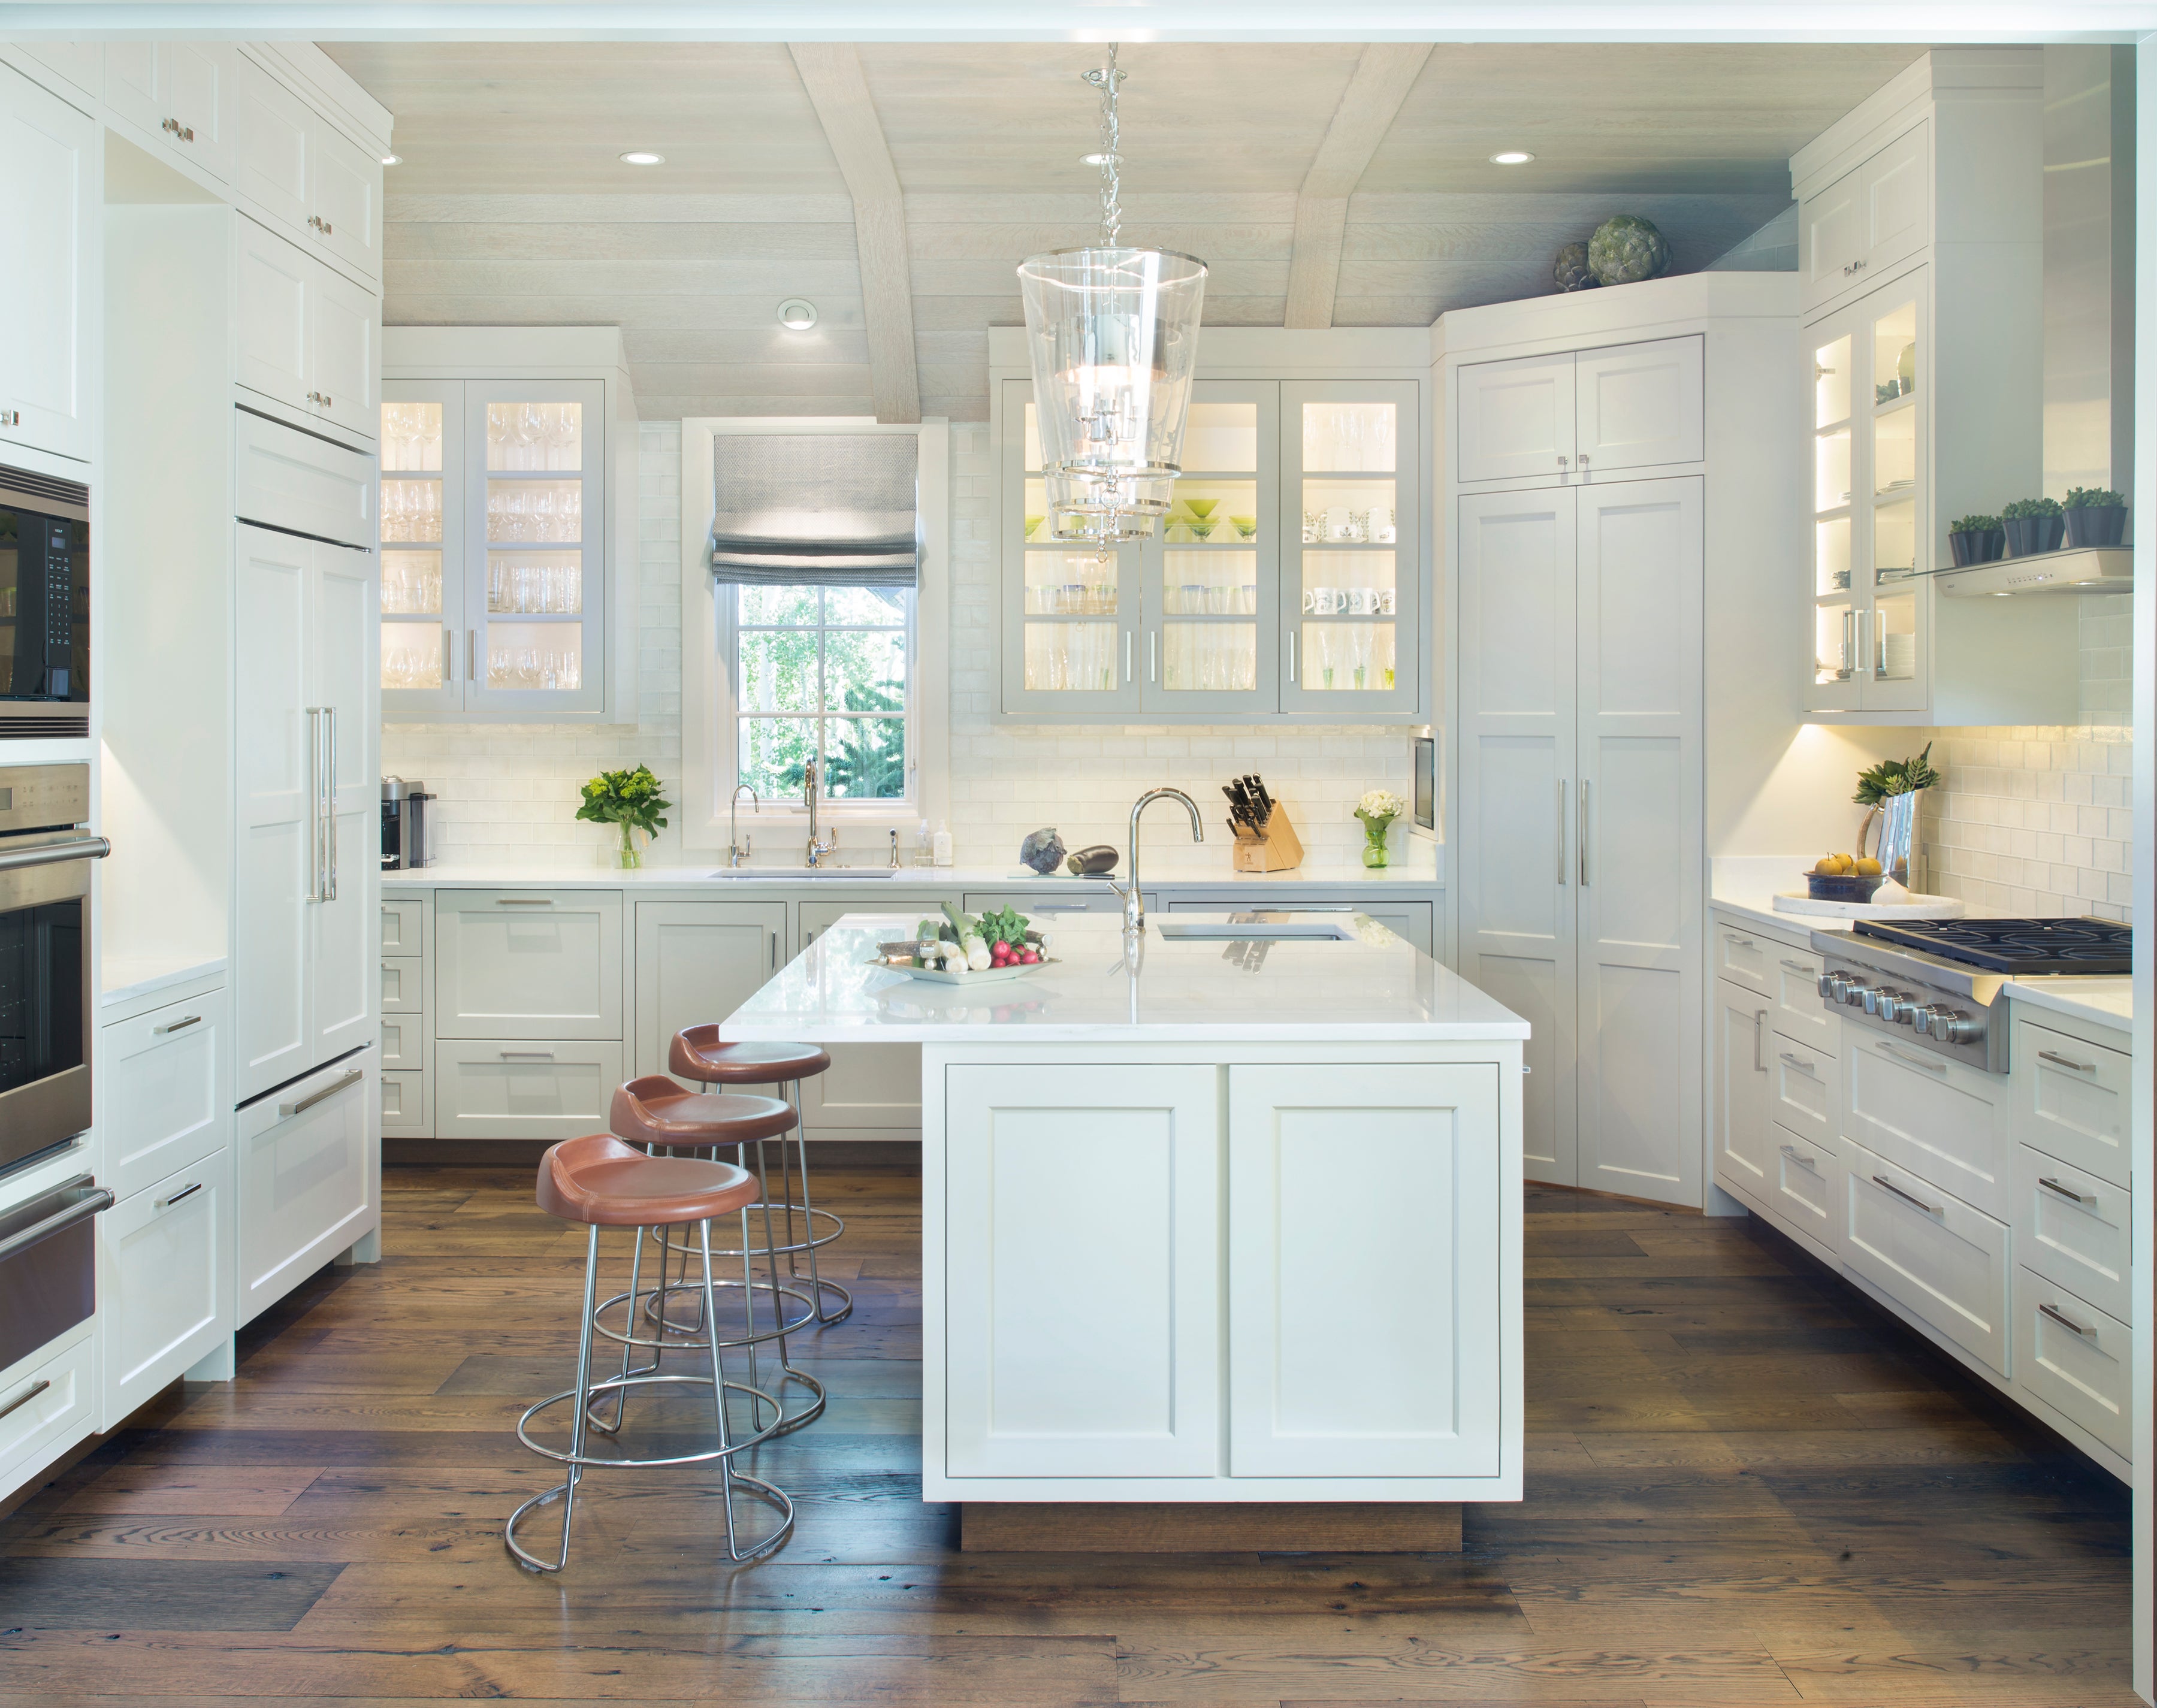 Kitchen by Forum Phi Interiors on 1stdibs